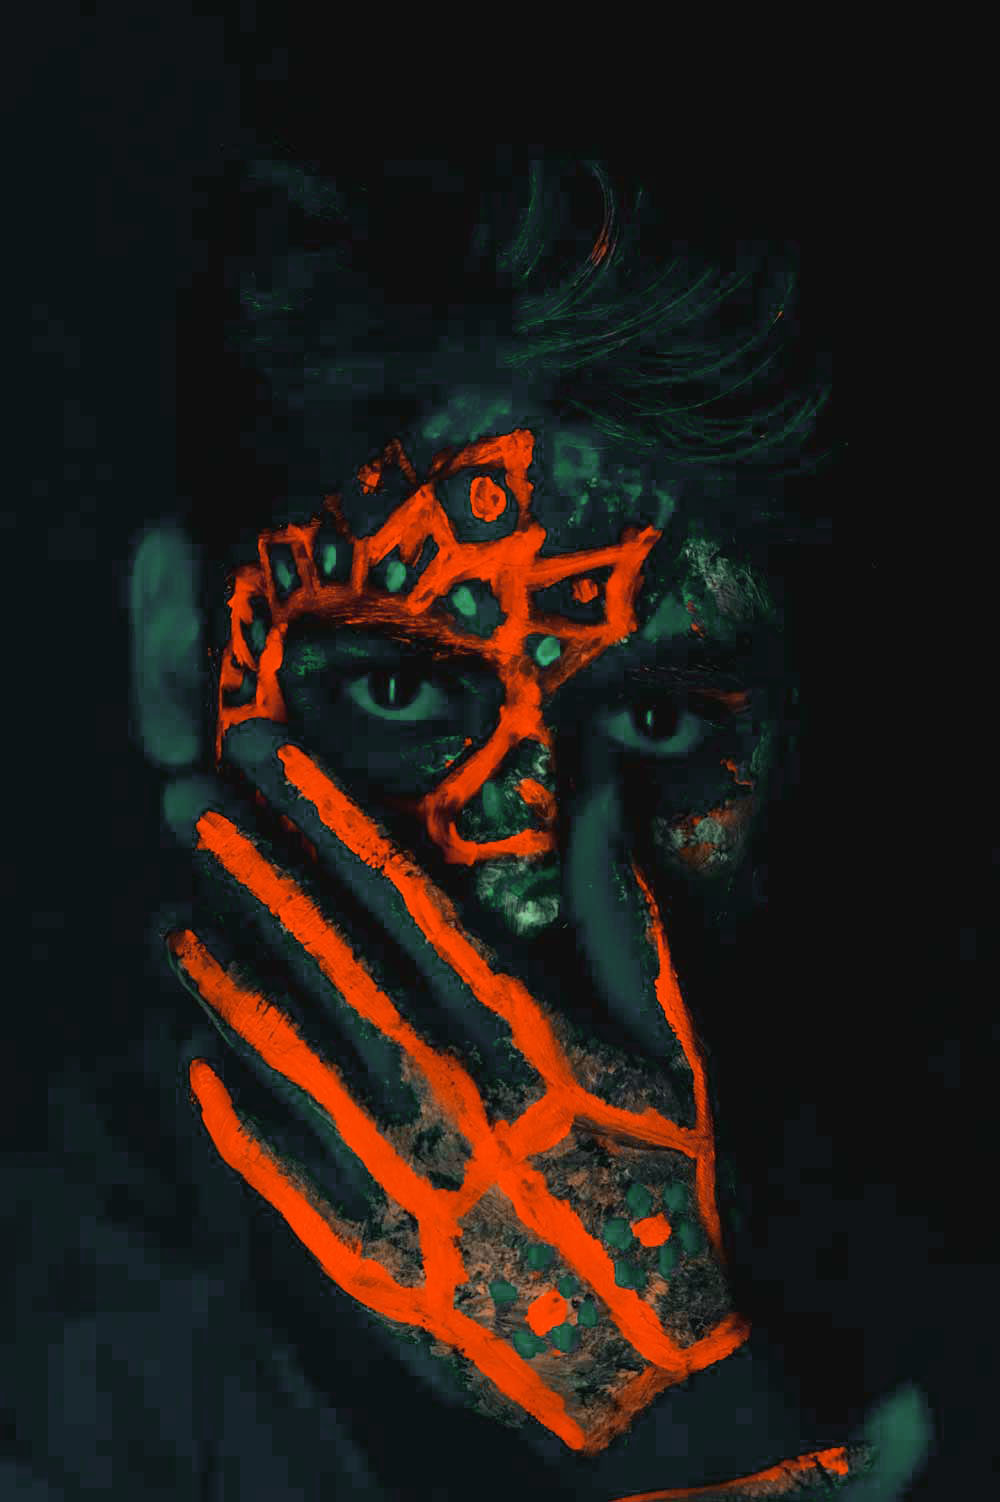 artistic image of a man with an orange painting on his face similar to mexican style of face painting with a dark and black background